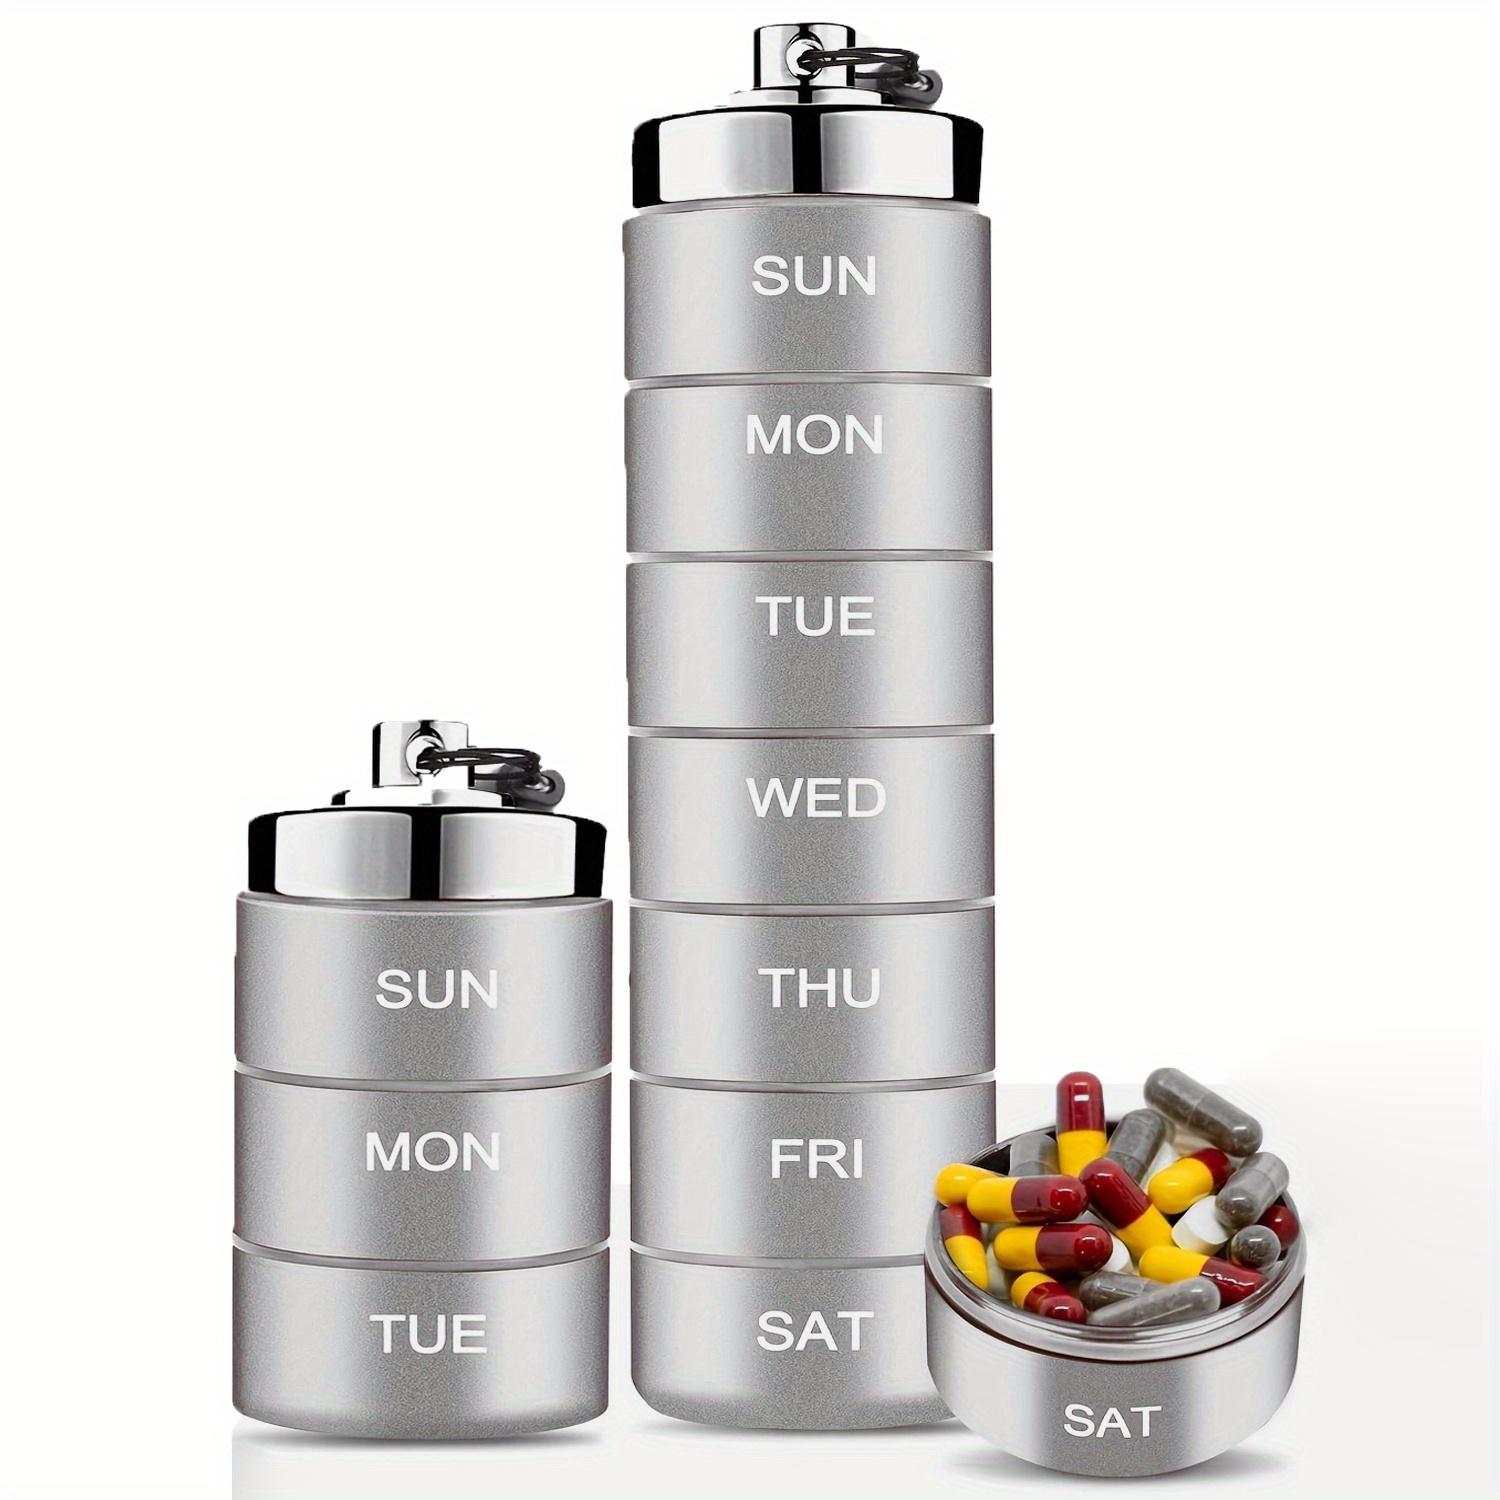 Zannaki Metal Moisture Proof Weekly Pill Organizer, Stackable Aluminum Alloy BPA Free Travel Hiking 7 Day Pill Box Case Waterproof and Large